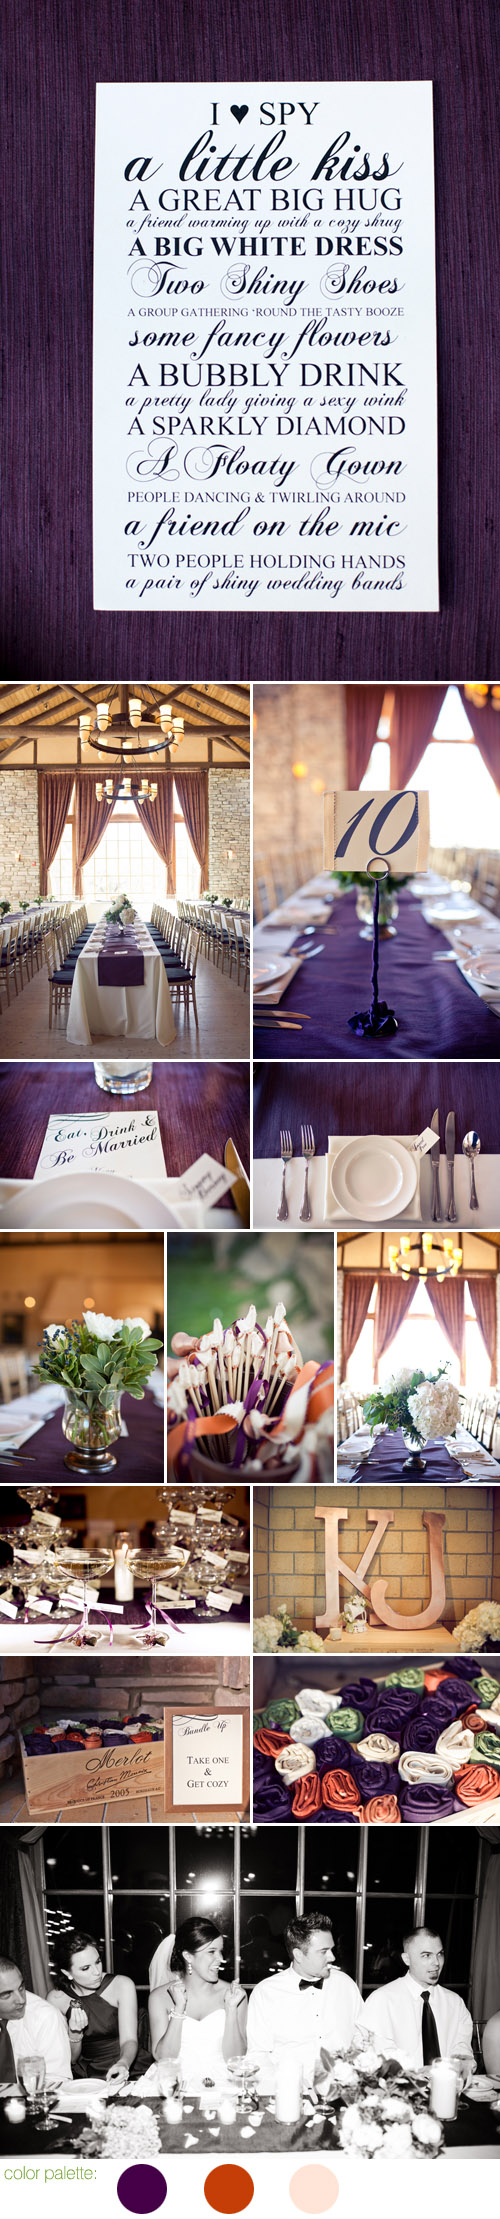 stylish vintage inspired Prescott, Arizona wedding, blackberry, copper and champagne wedding color palette, images by Marianne Wilson Photography